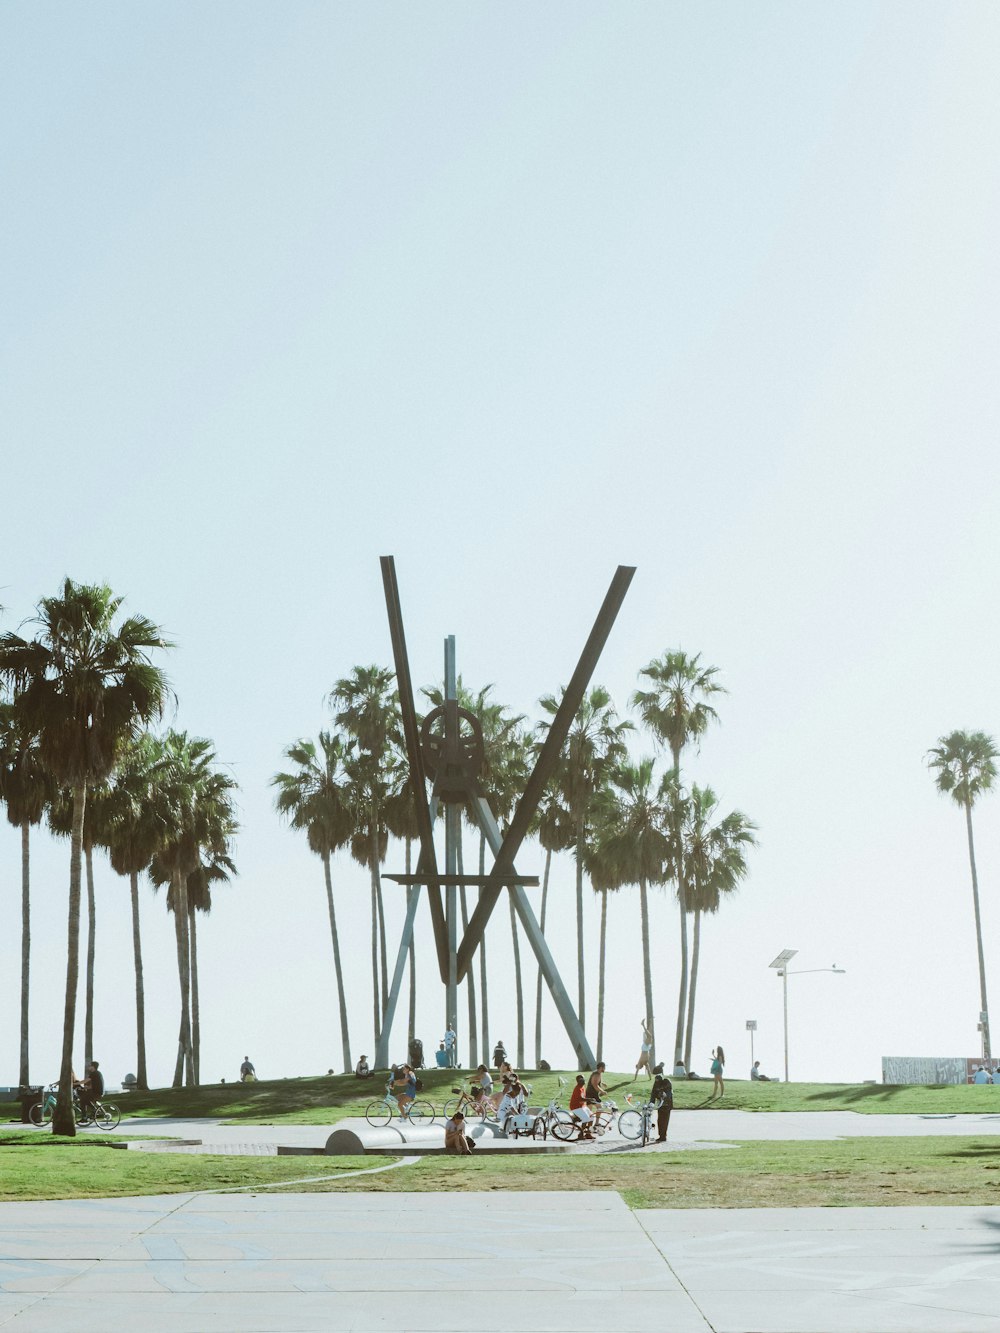 group of people at park near palm trees